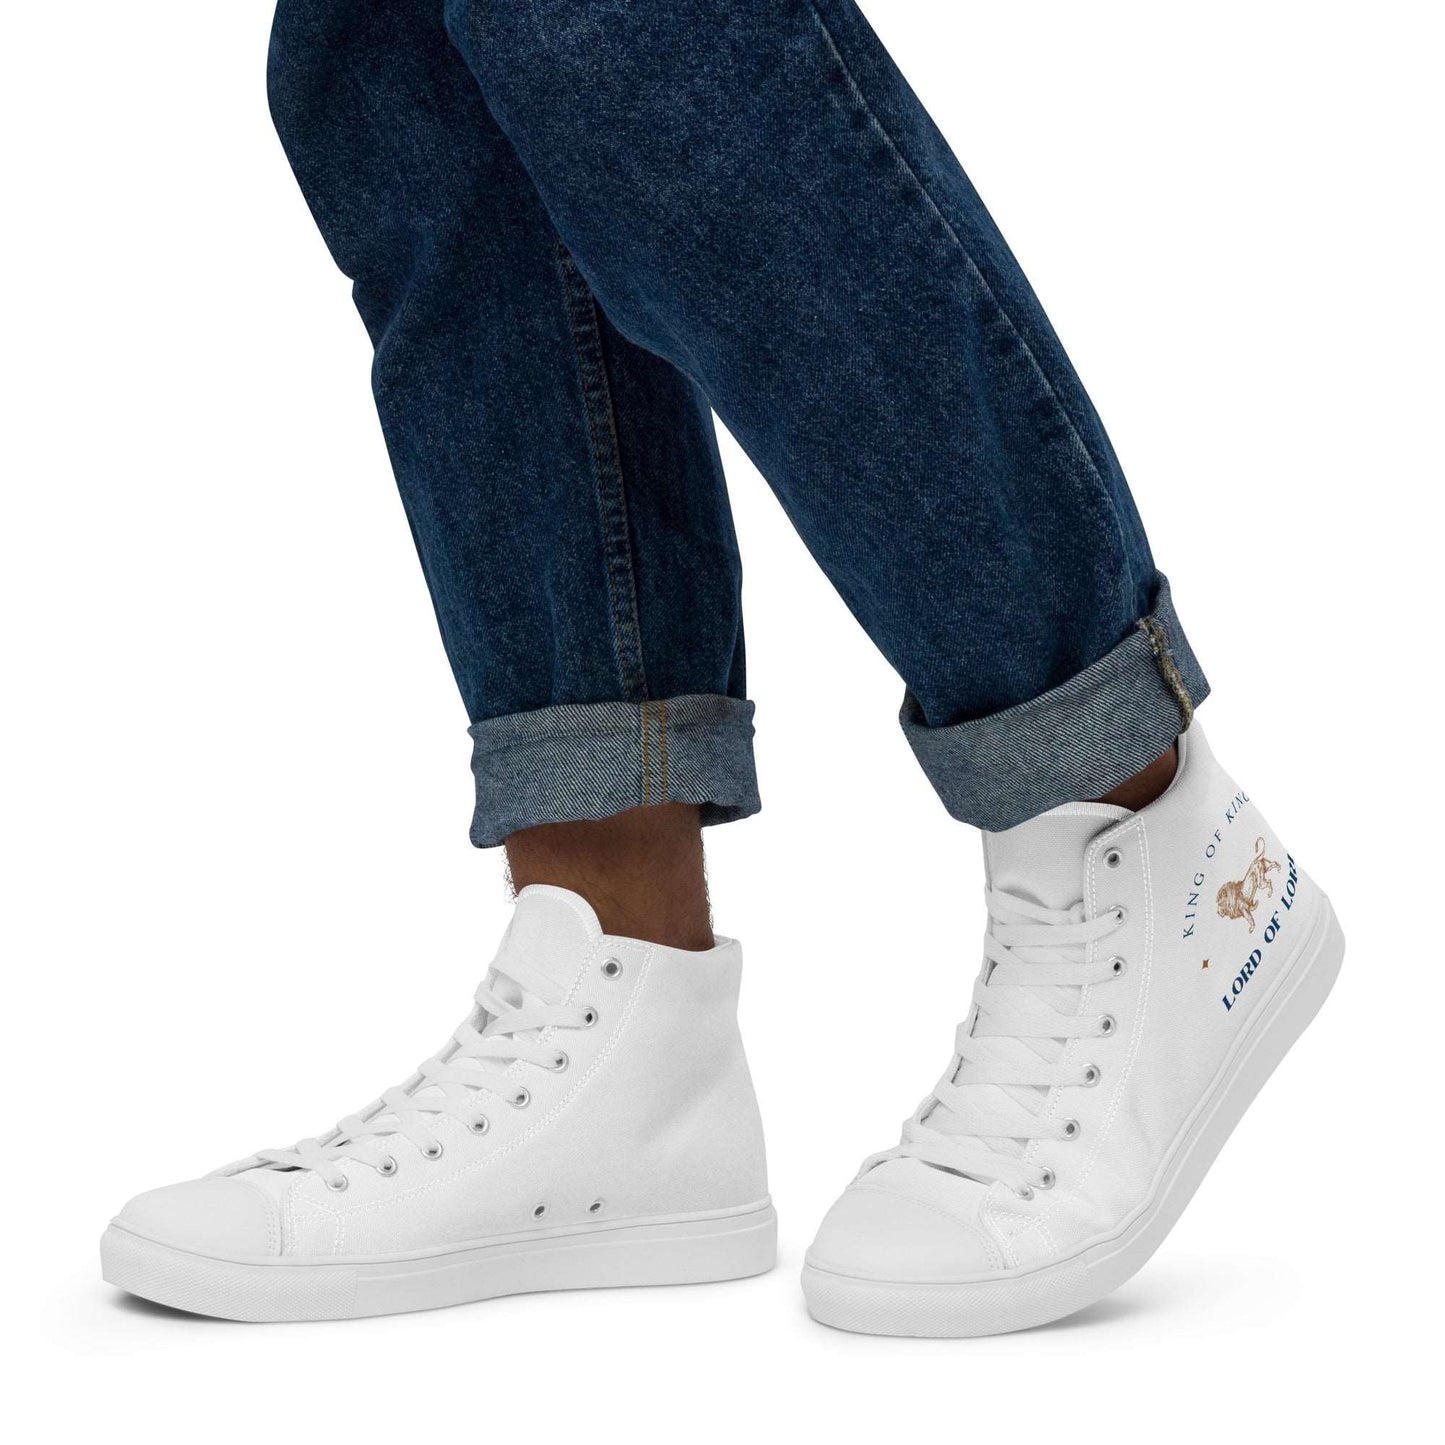 Men’s high top canvas shoes - KING OF KINGS